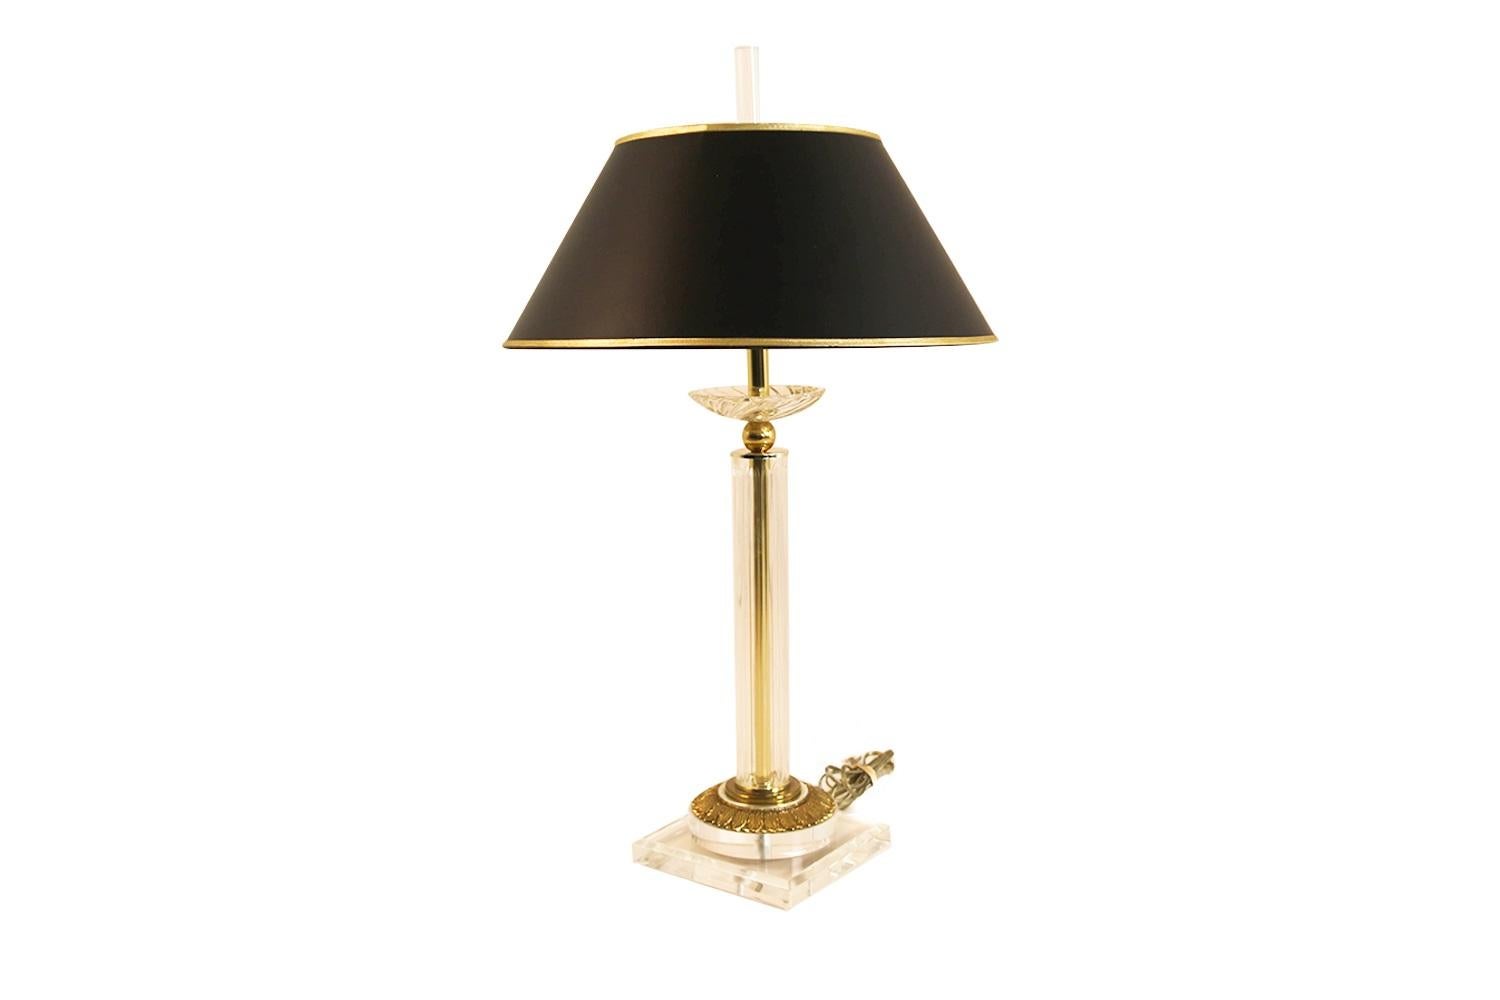 Empire revival lamp by Bauer Lamp Company. A classic empire style Lucite and brass lamp featuring a fluted Lucite column with a brass interior stem, square Lucite base topped with an embossed brass cap. The fluted glass column is capped with an